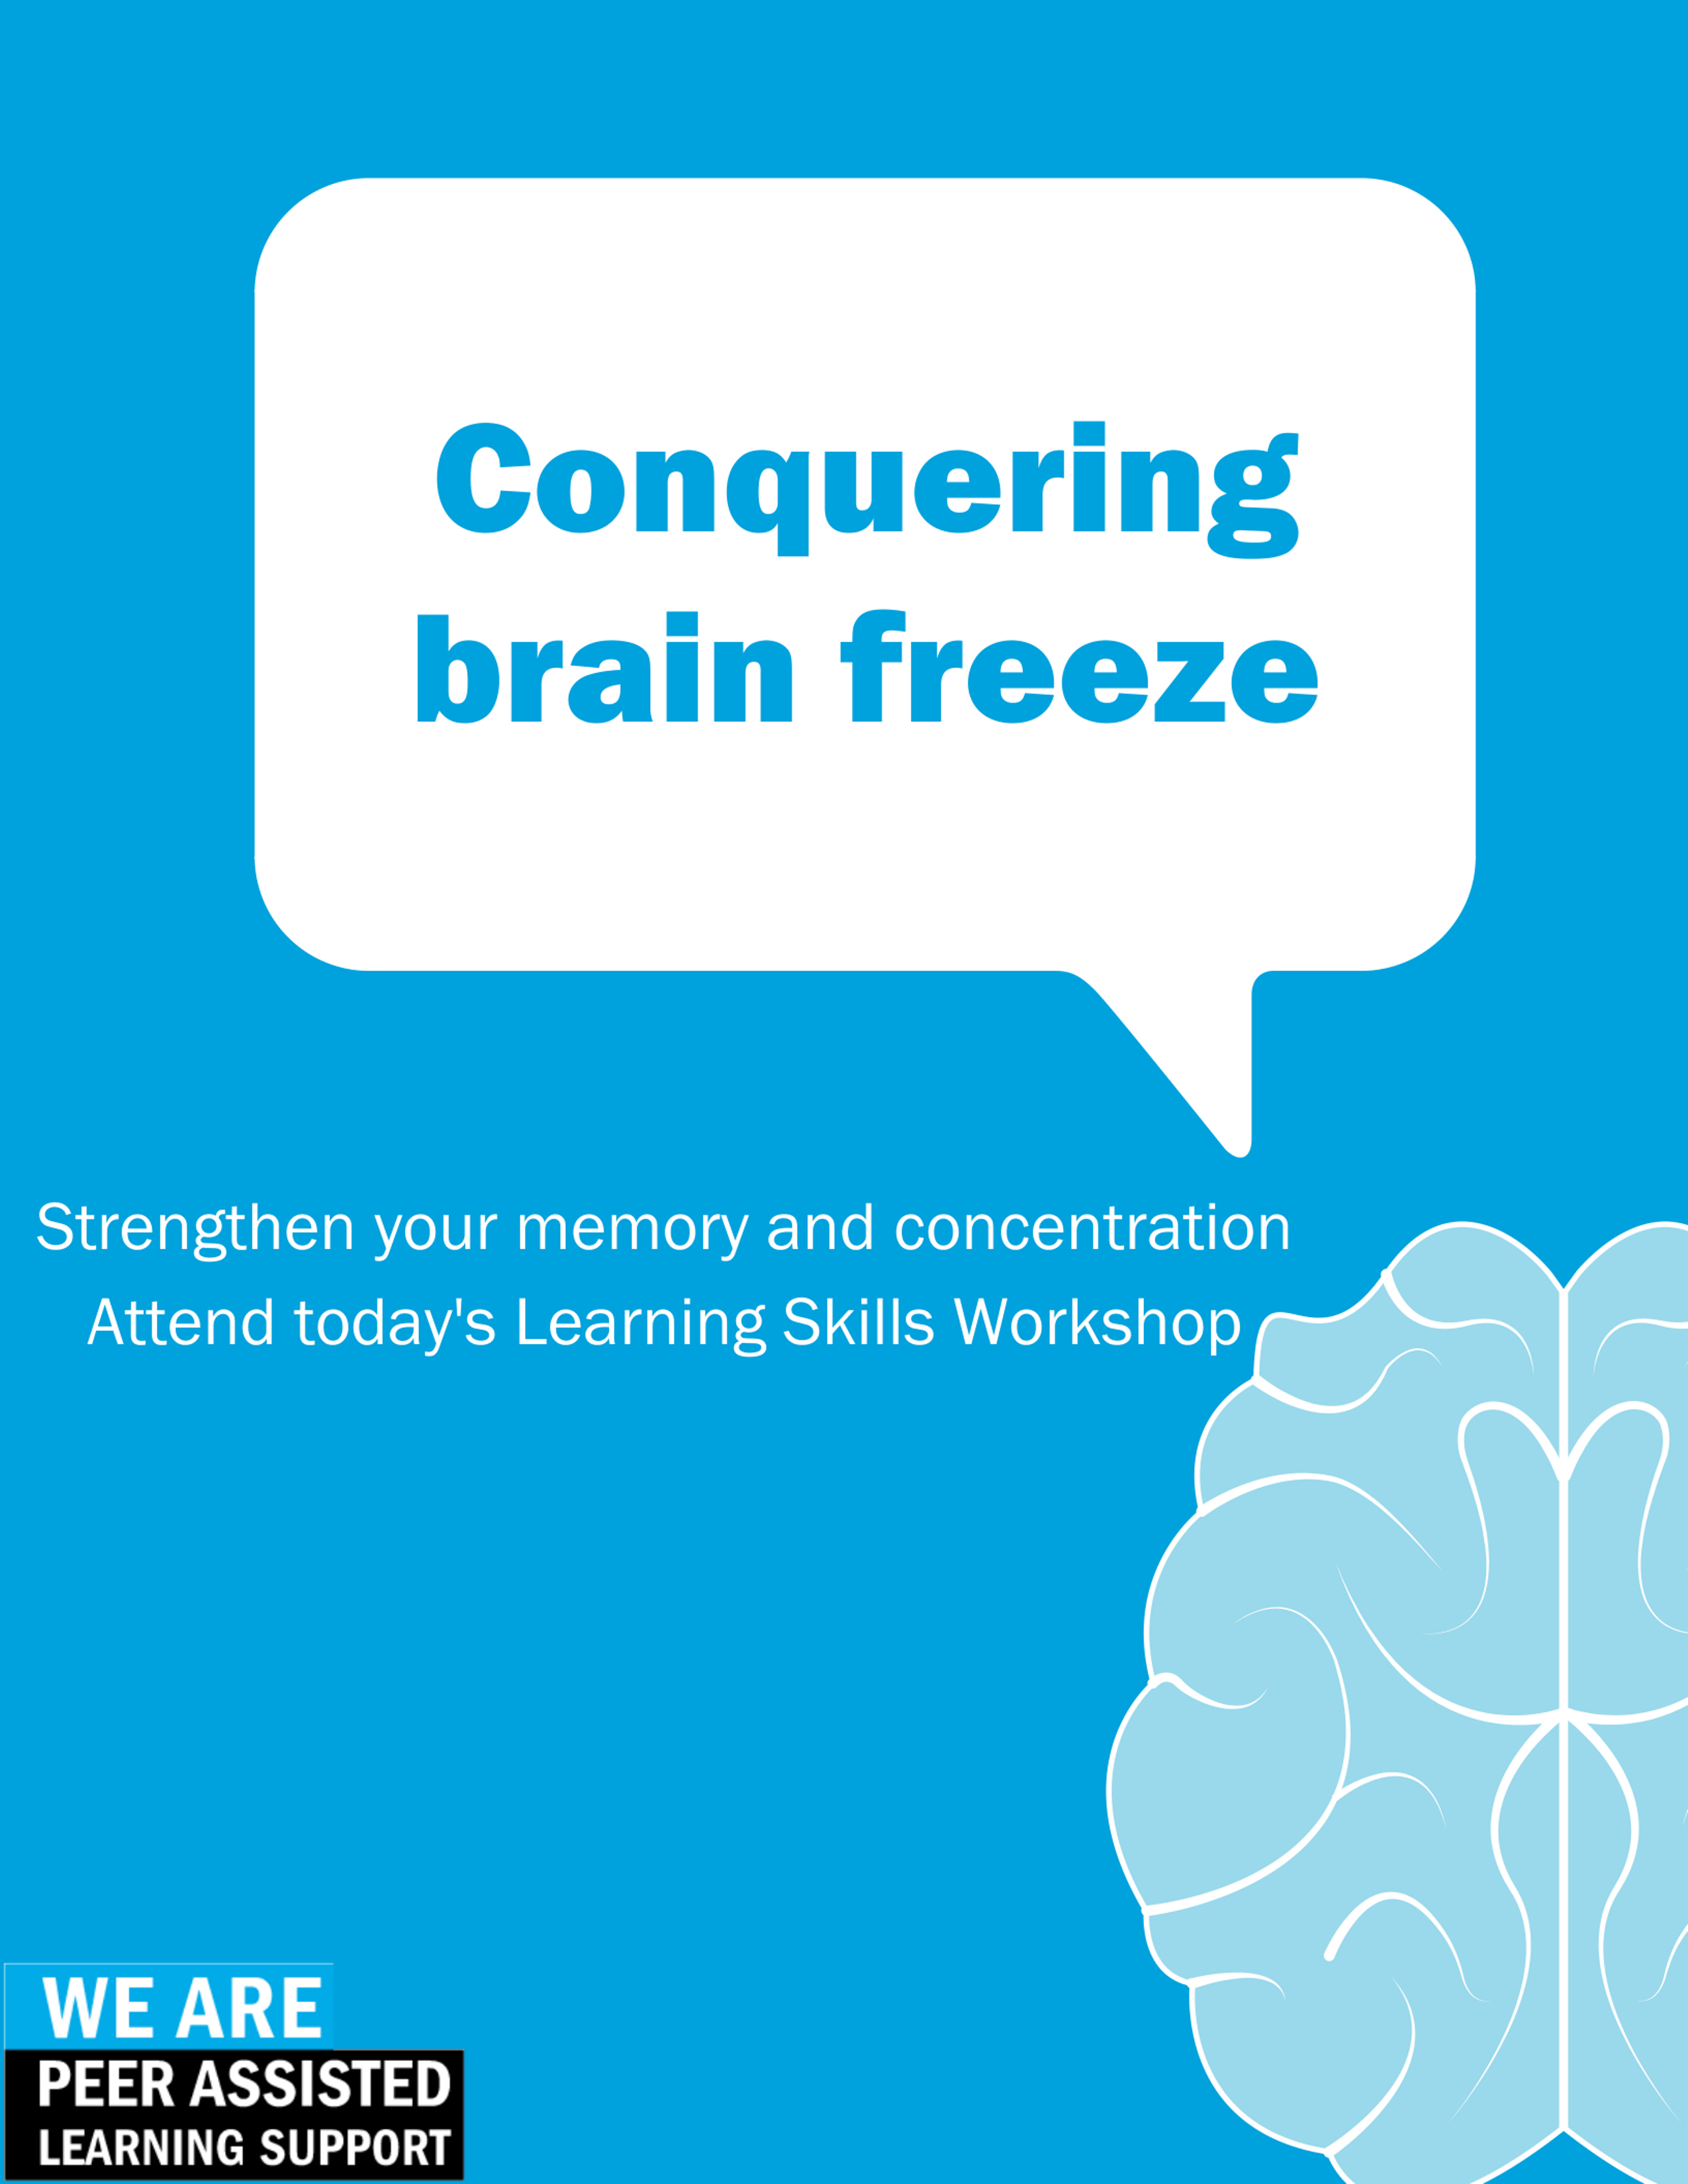 An image of a brain on a bright blue background. Background text says “Conquering brain freeze. Strengthen your memory and conce